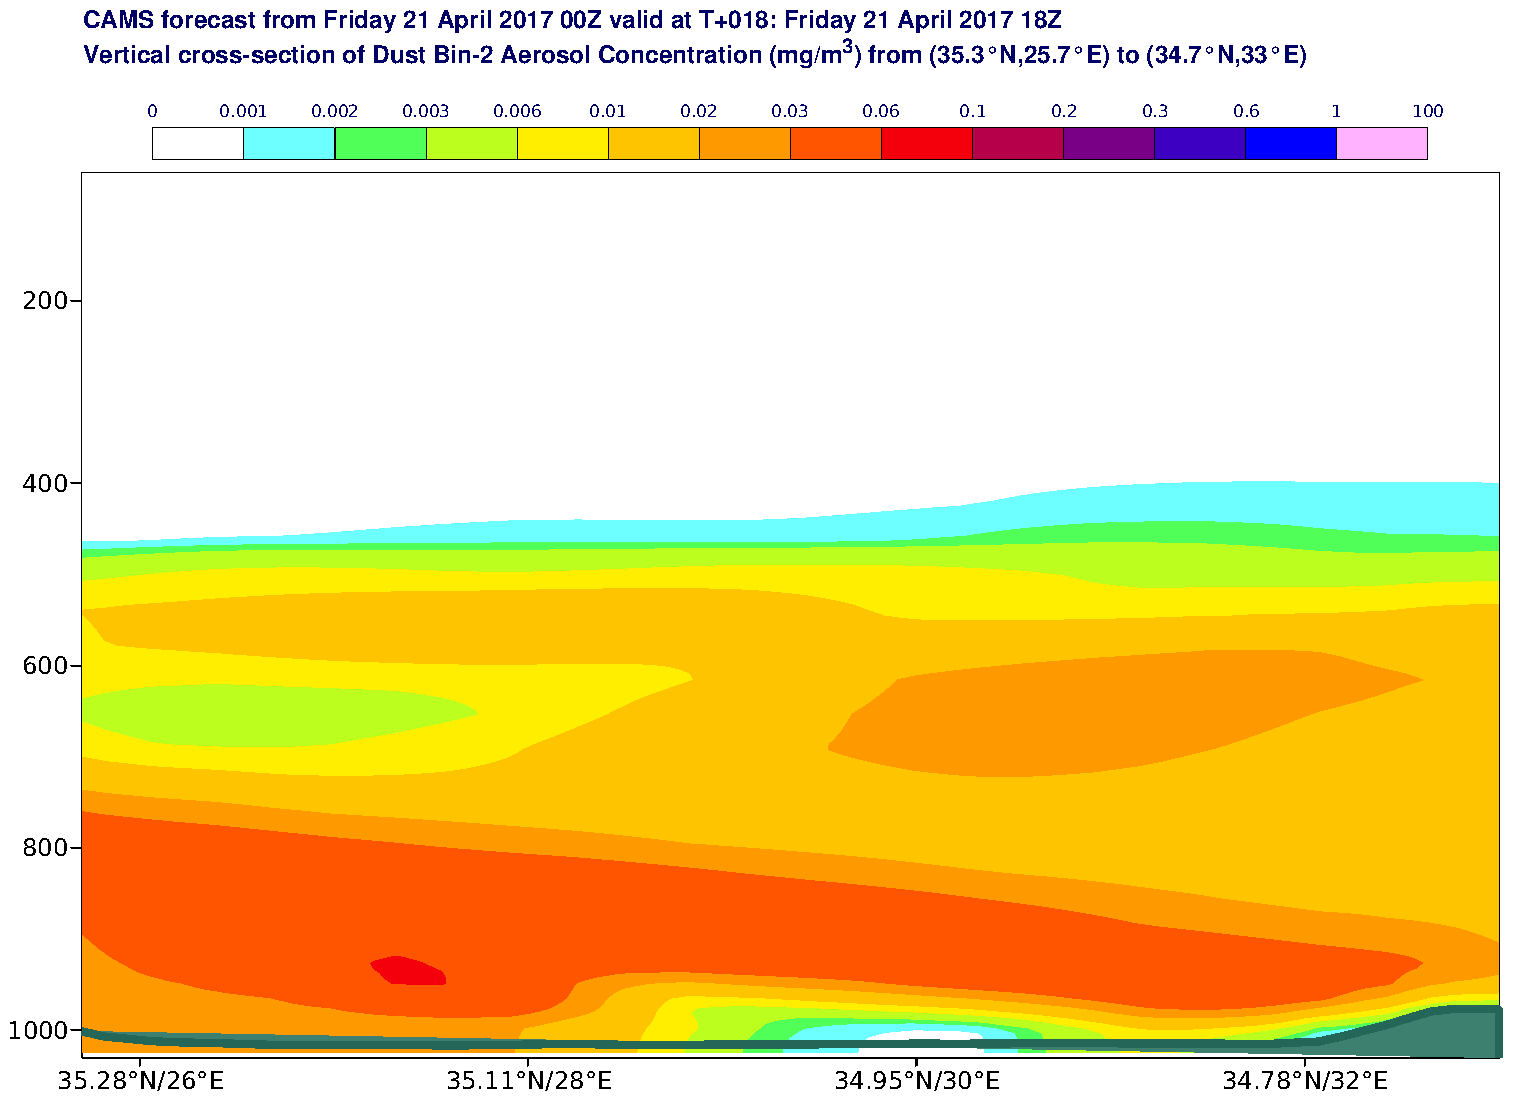 Vertical cross-section of Dust Bin-2 Aerosol Concentration (mg/m3) valid at T18 - 2017-04-21 18:00